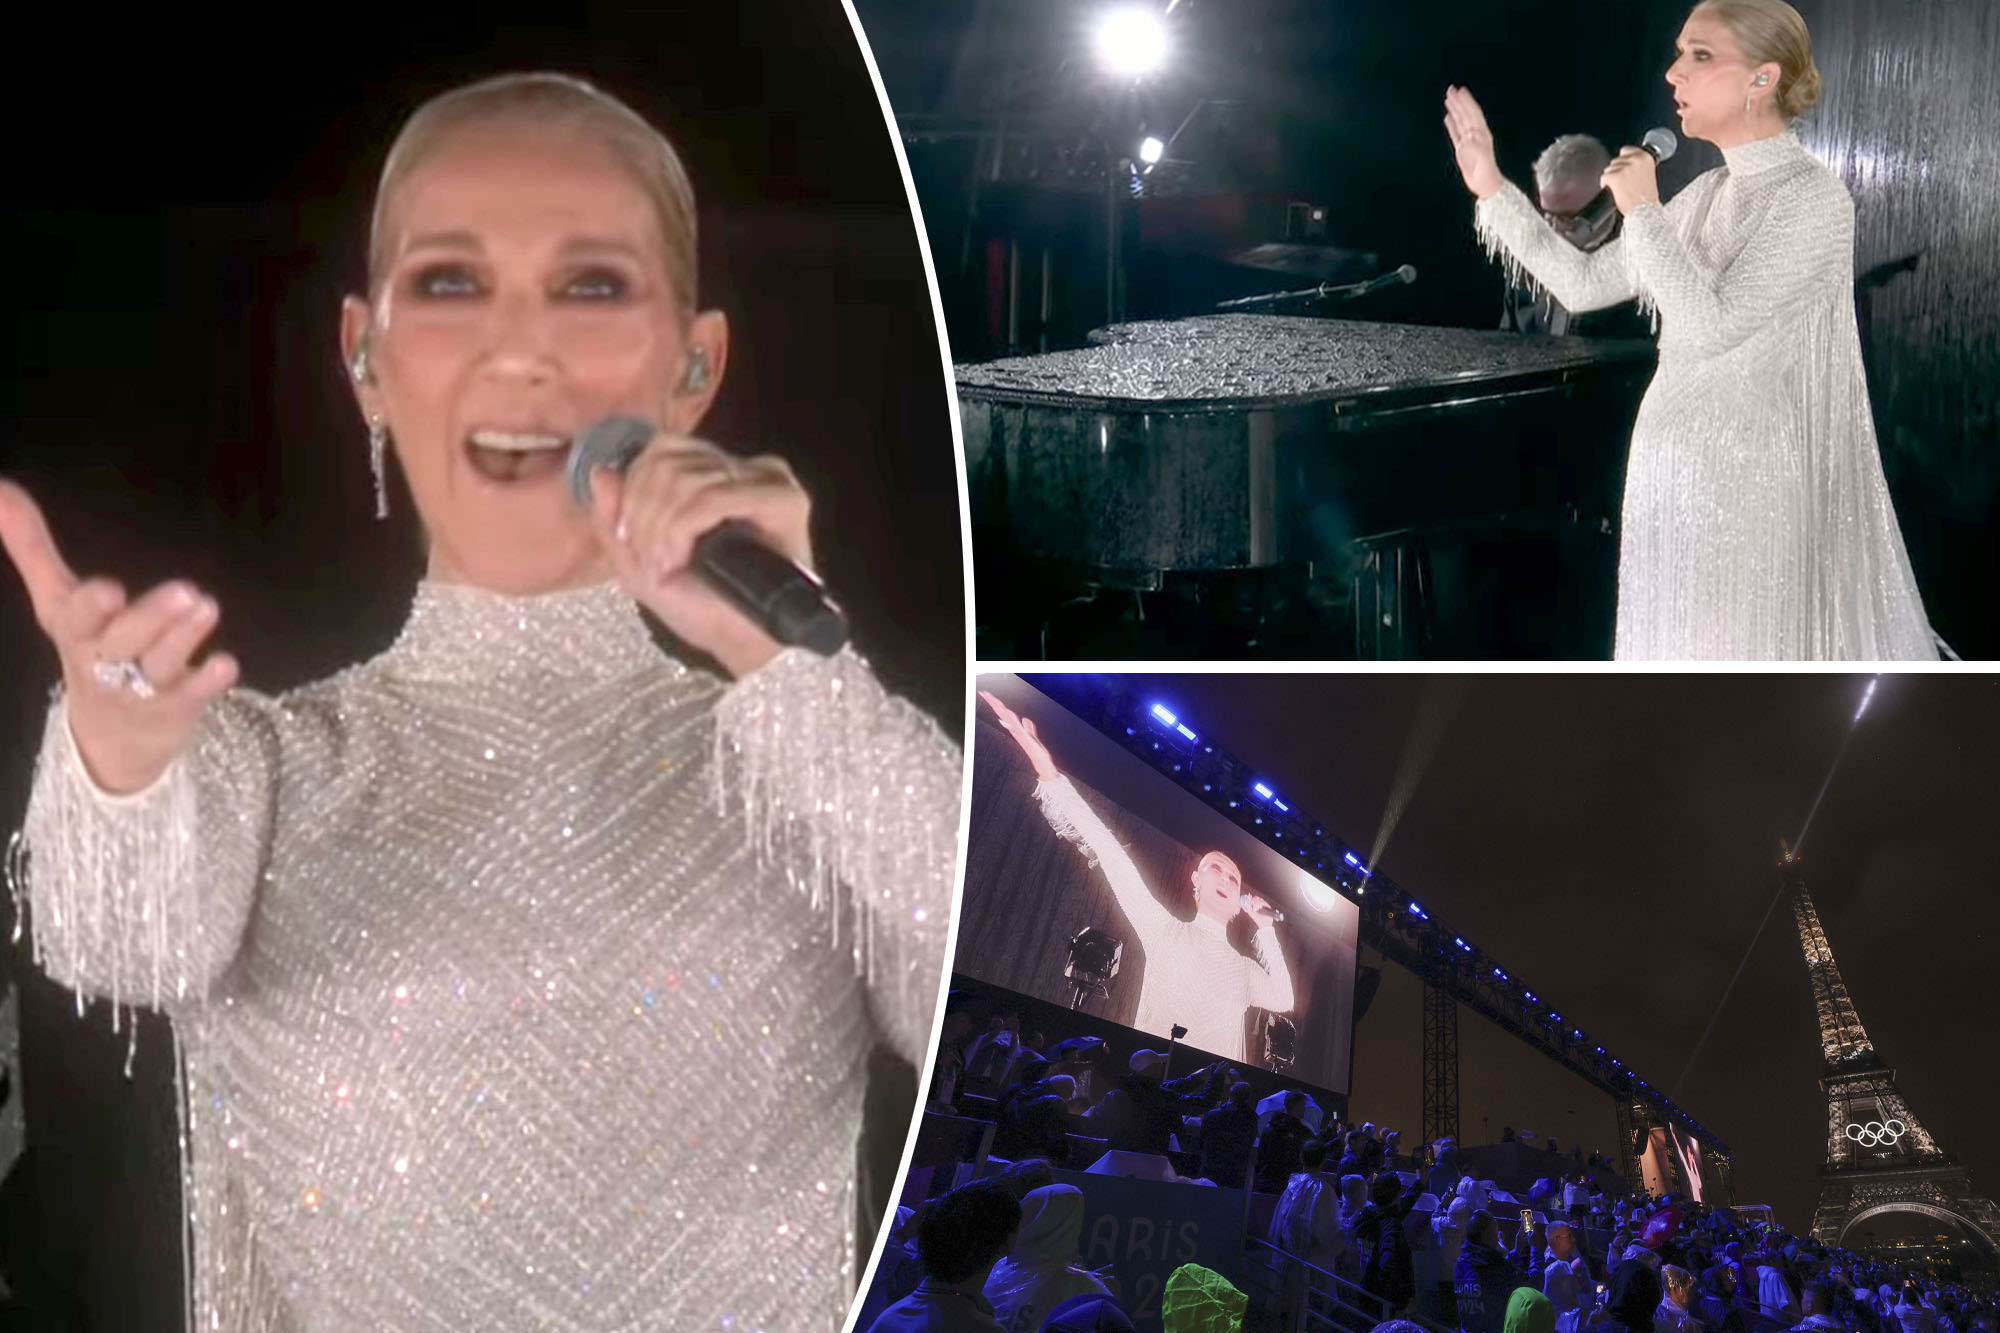 Celine Dion delivers emotional comeback performance on Eiffel Tower at Olympics 2024 Opening Ceremony